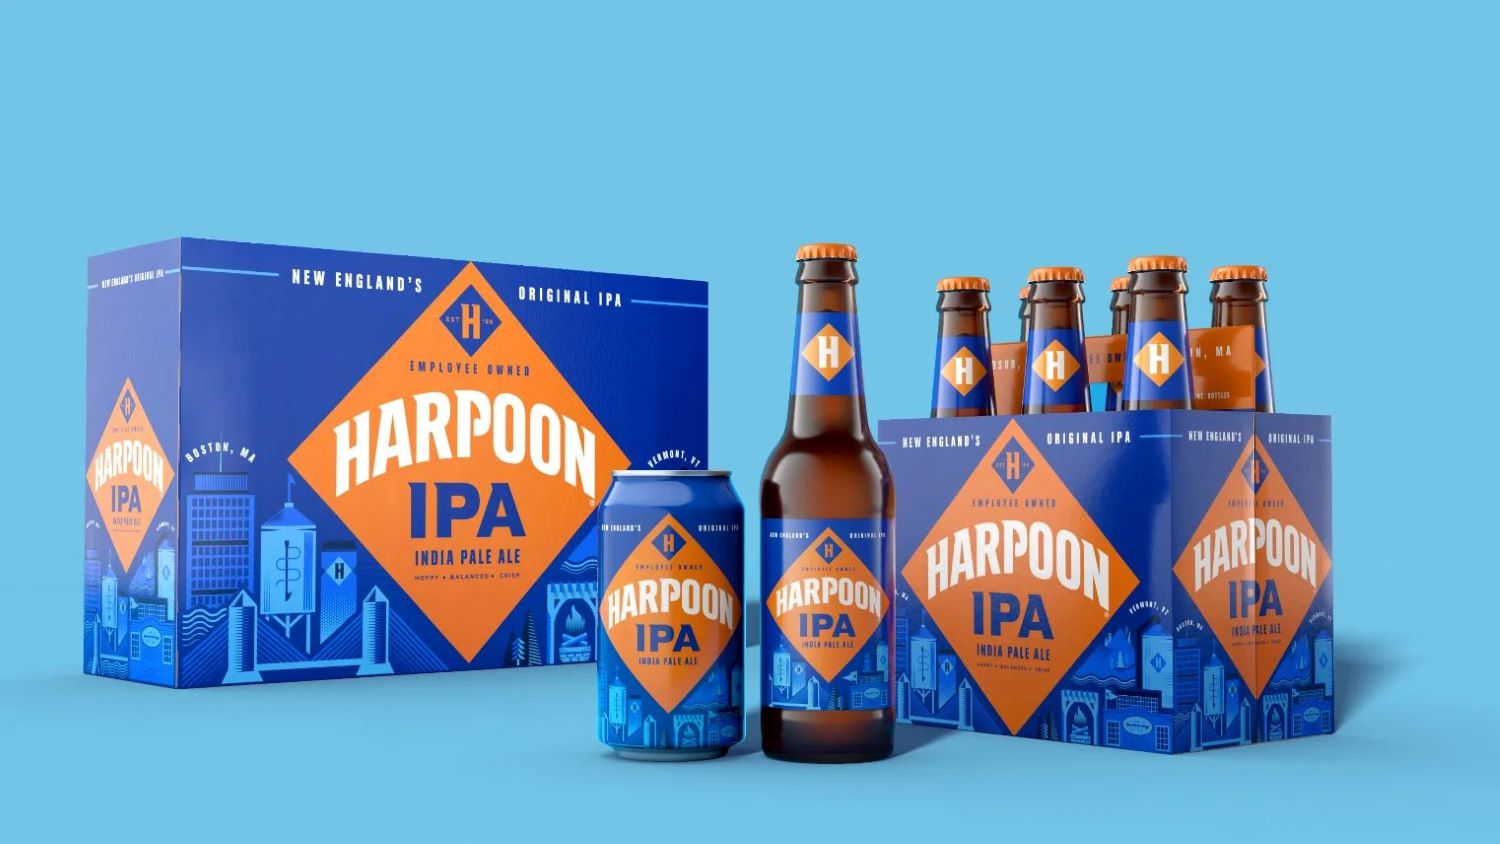 Harpoon ipa with fish and chips